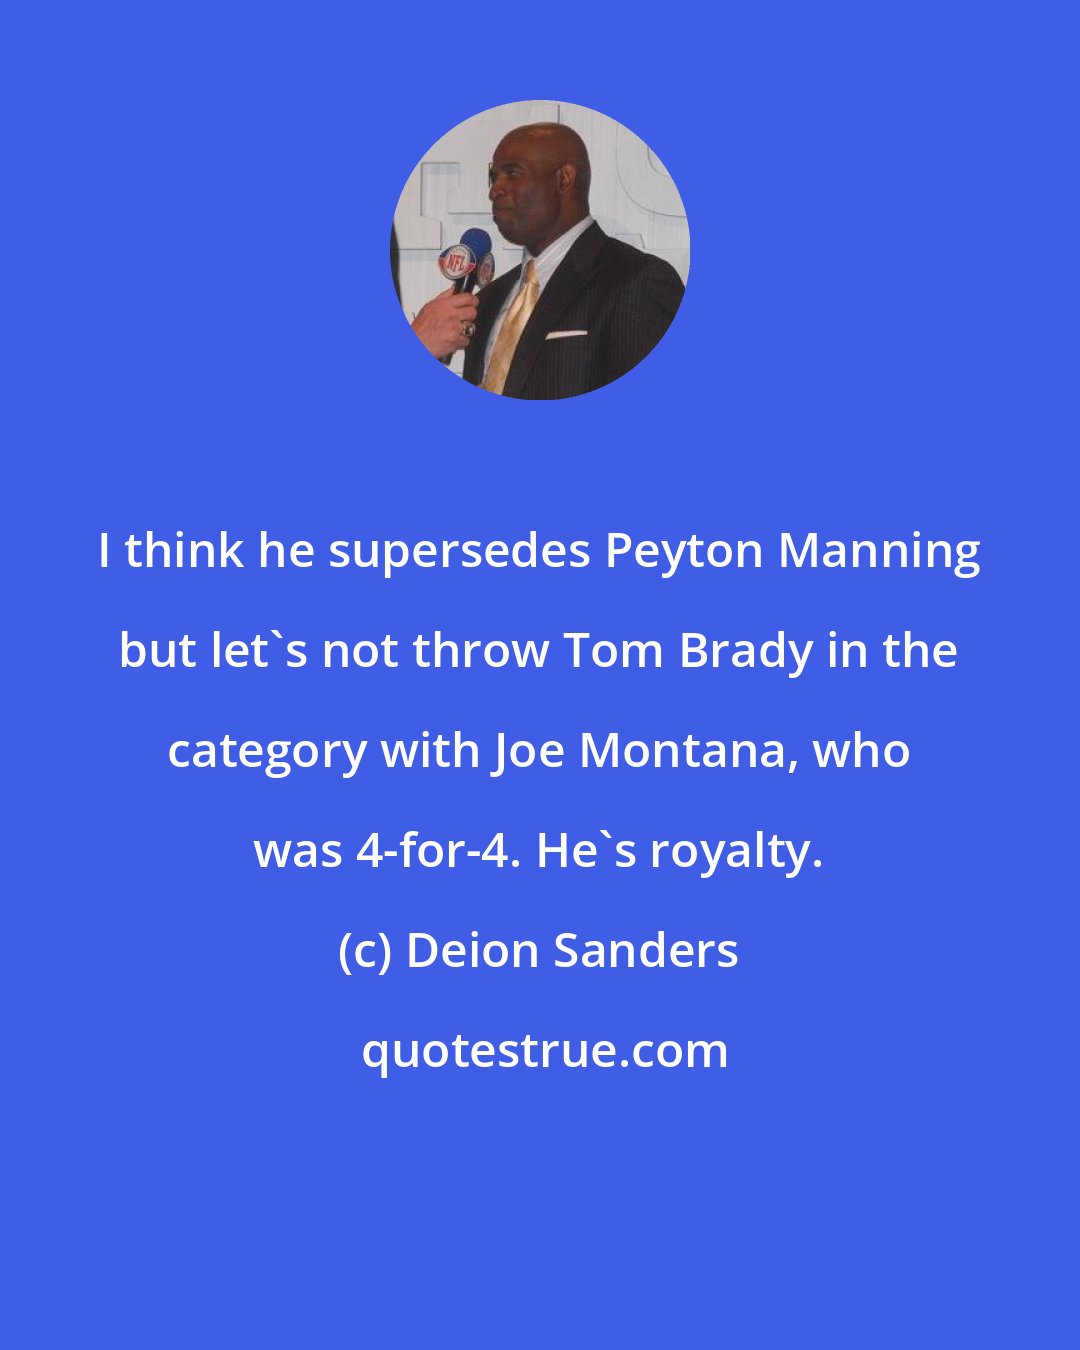 Deion Sanders: I think he supersedes Peyton Manning but let's not throw Tom Brady in the category with Joe Montana, who was 4-for-4. He's royalty.